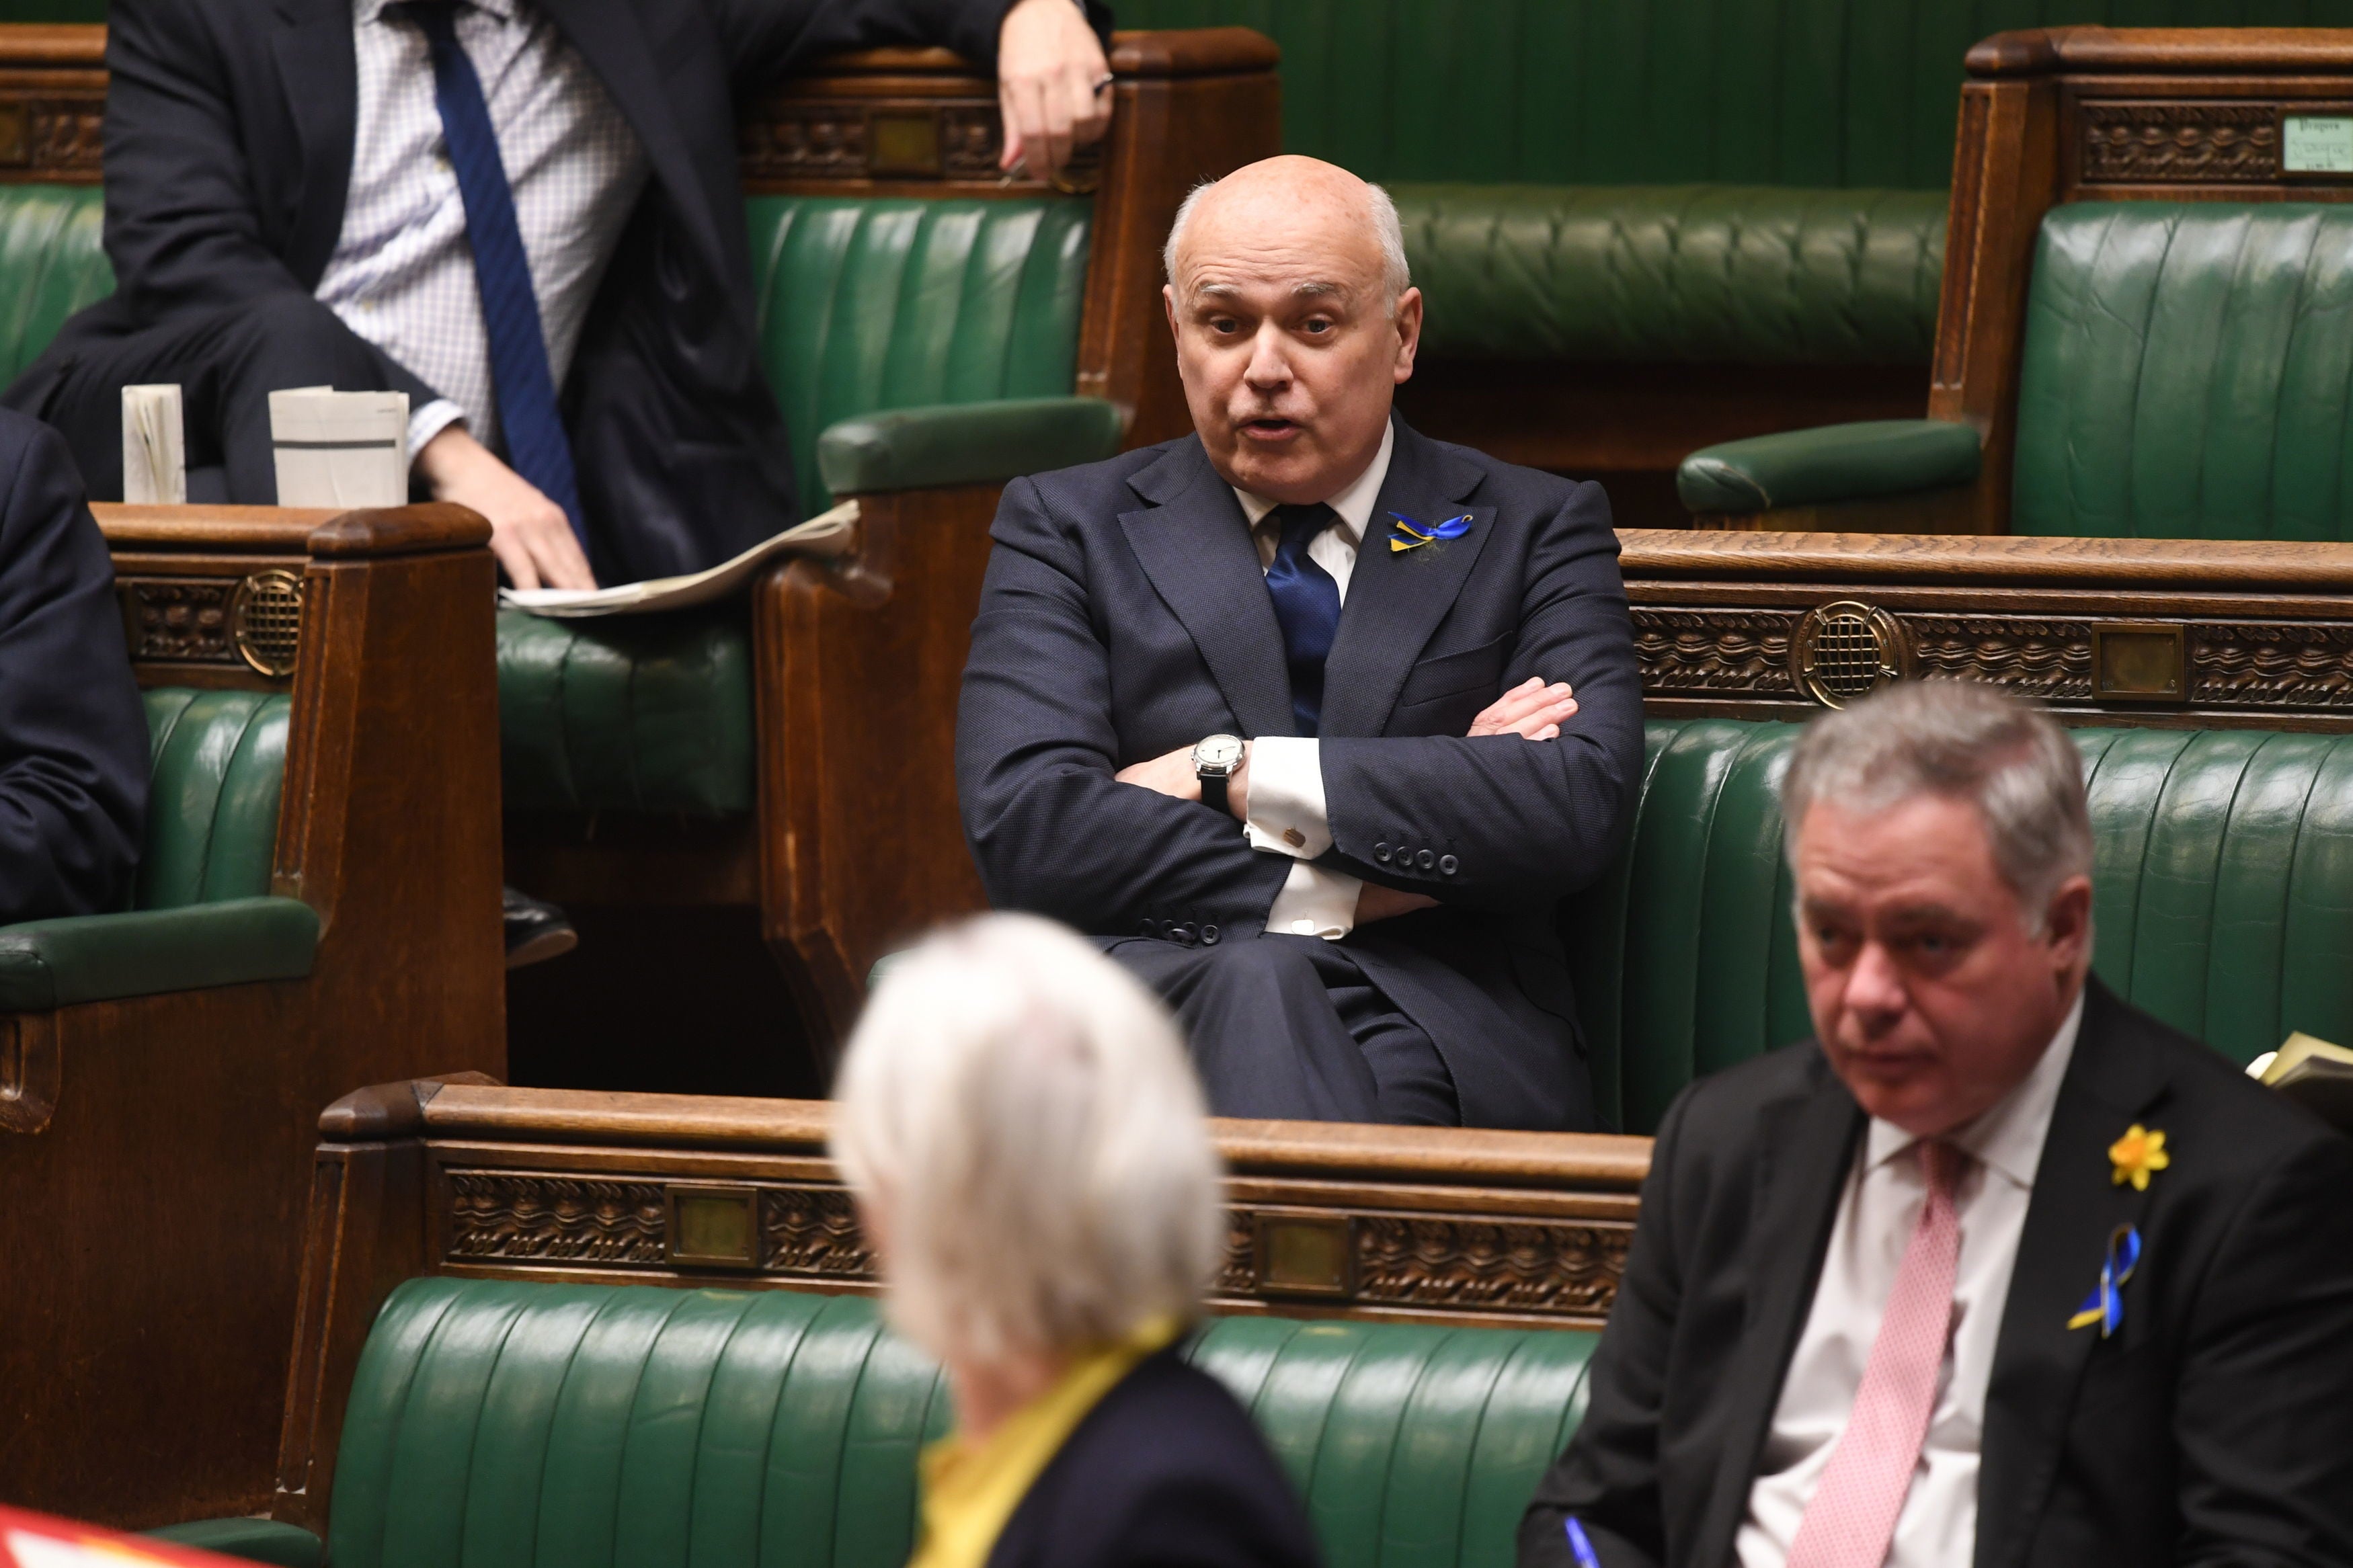 Iain Duncan Smith in parliament earlier this month.